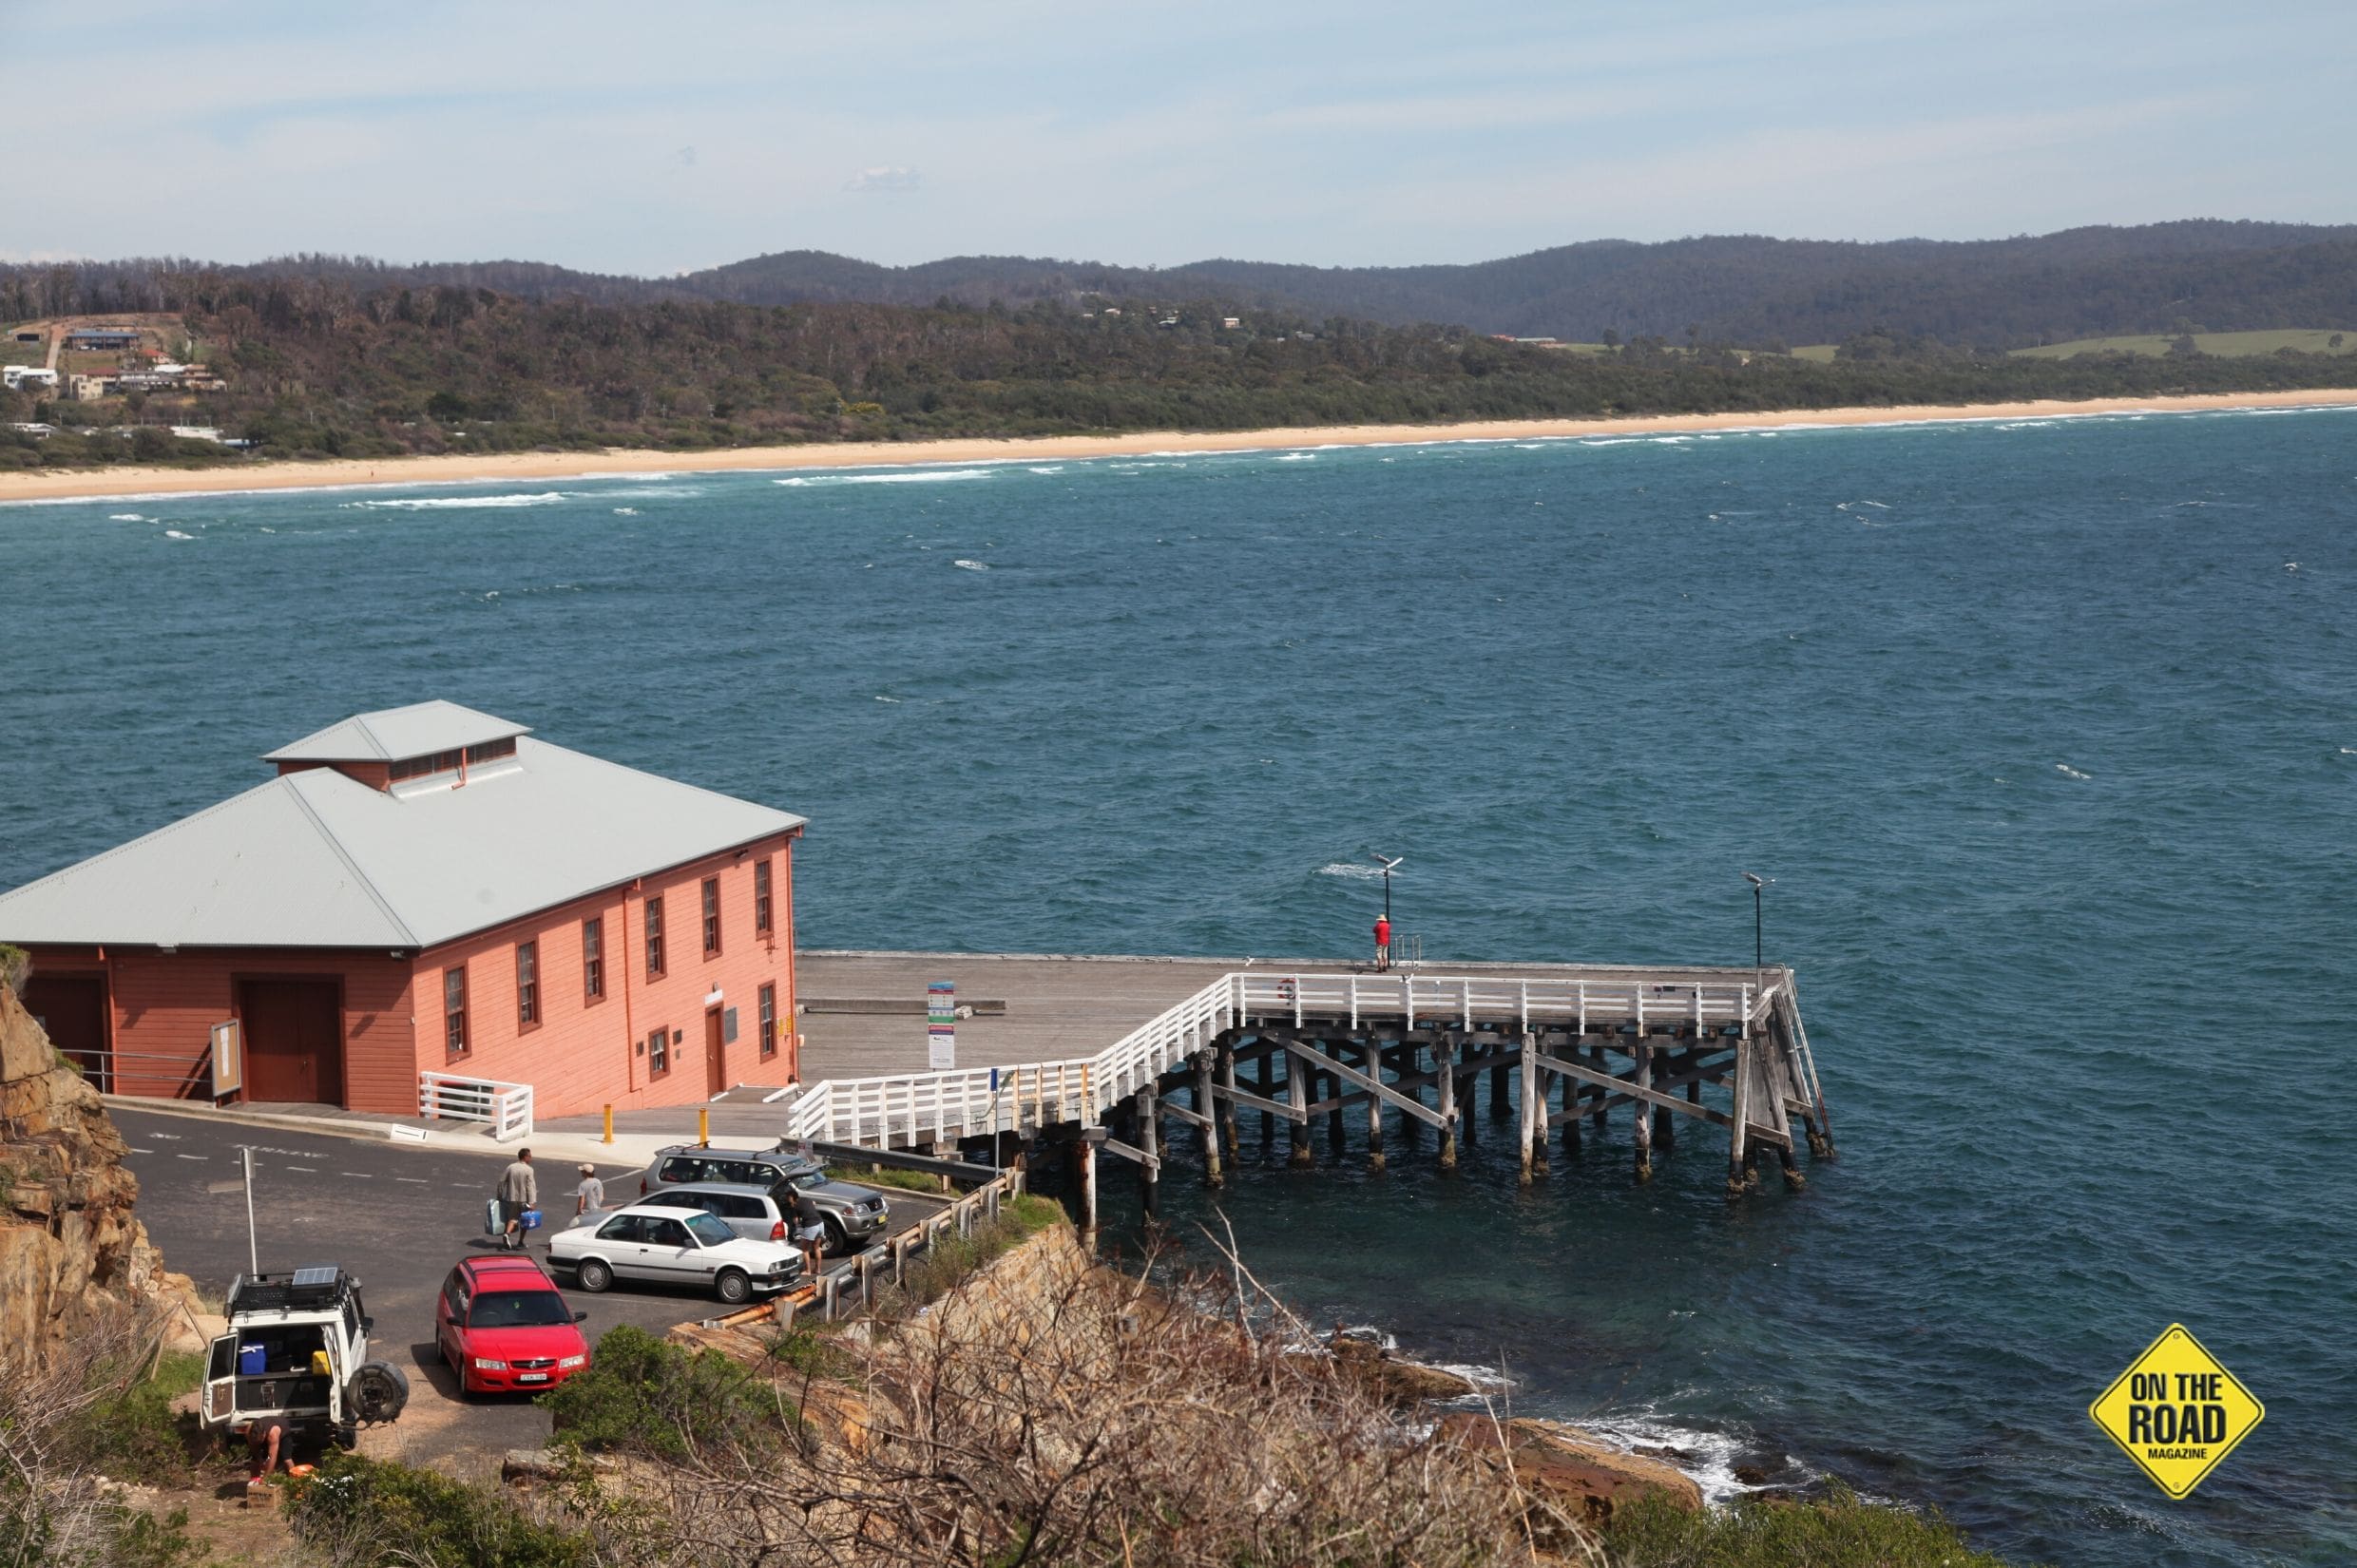 The famous Tathra wharf 150 years plus old and still going strong